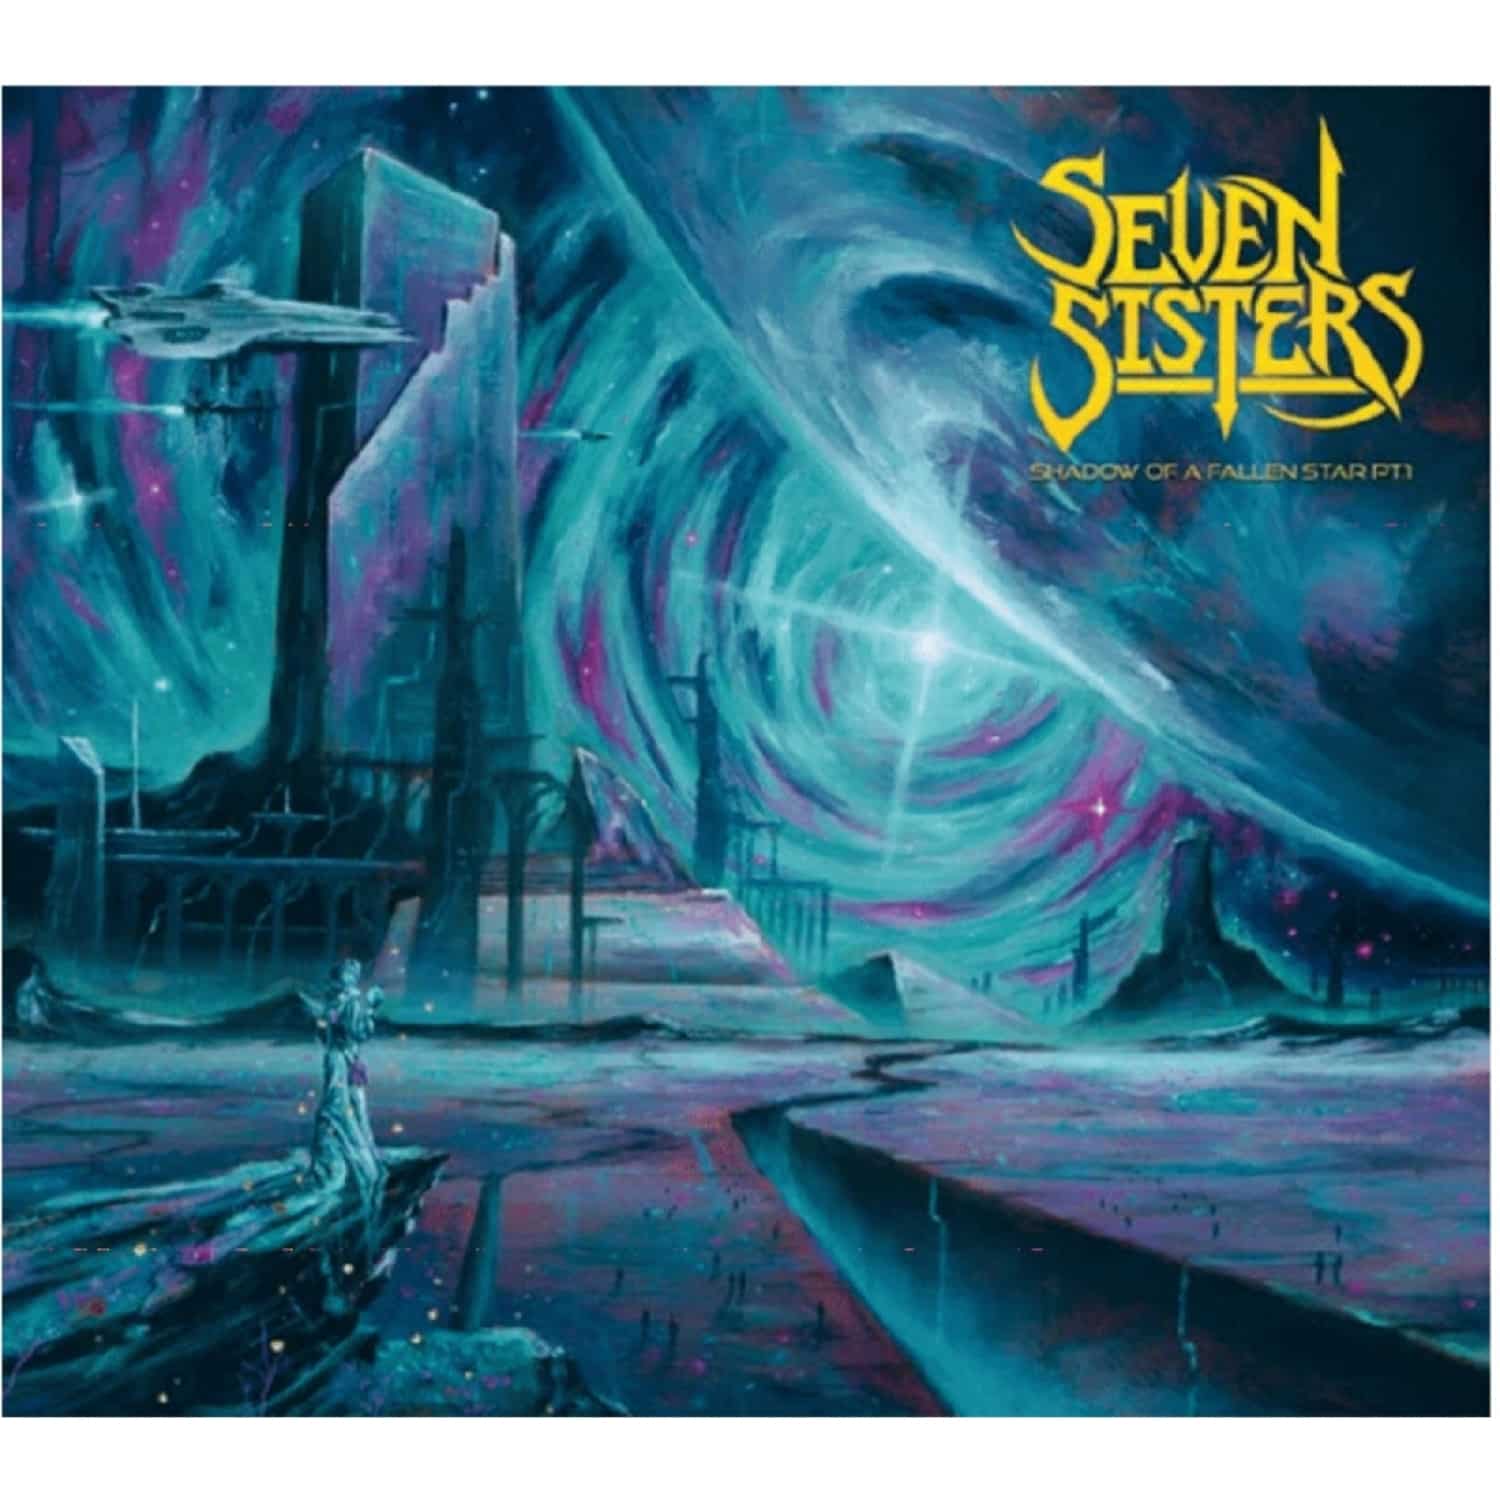 Seven Sisters - SHADOW OF A FALLING STAR PT.1 